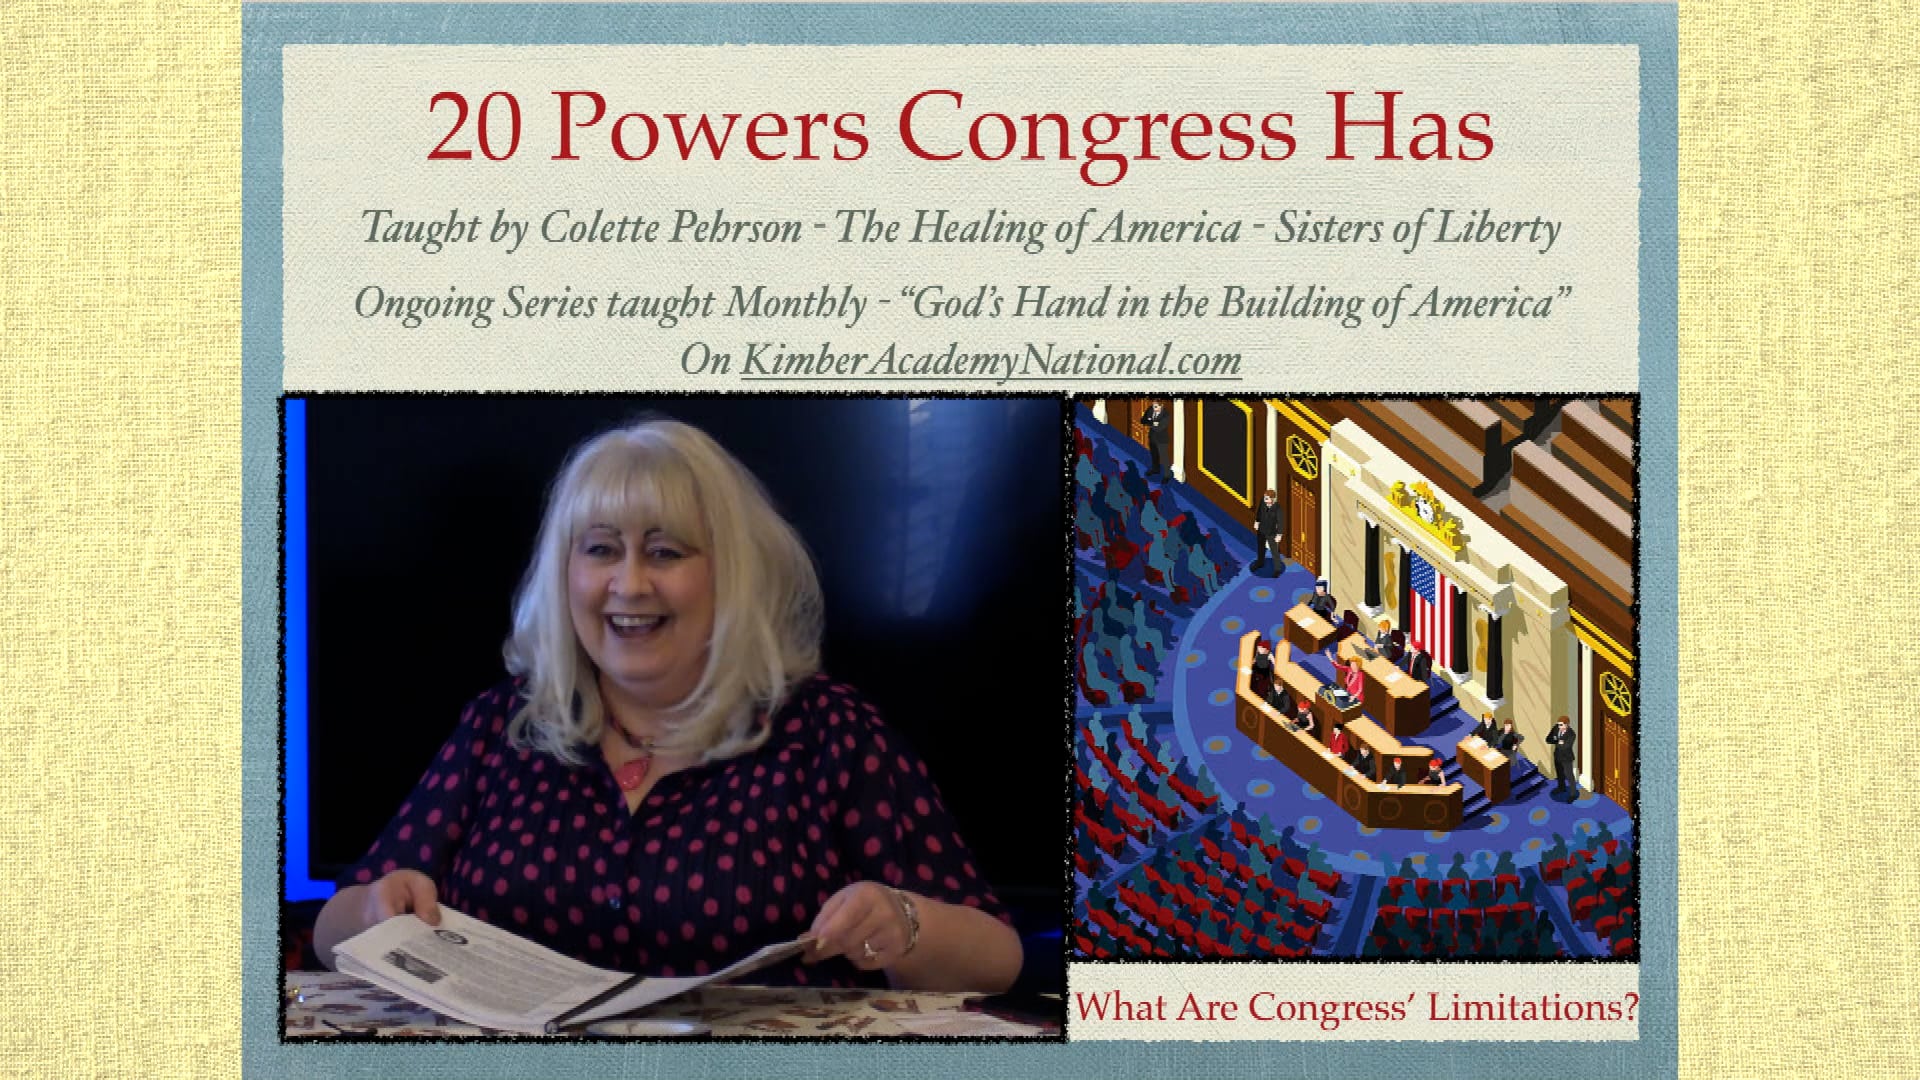 Colette Pehrson -Sisters of Liberty - The 20 Powers Congress Has